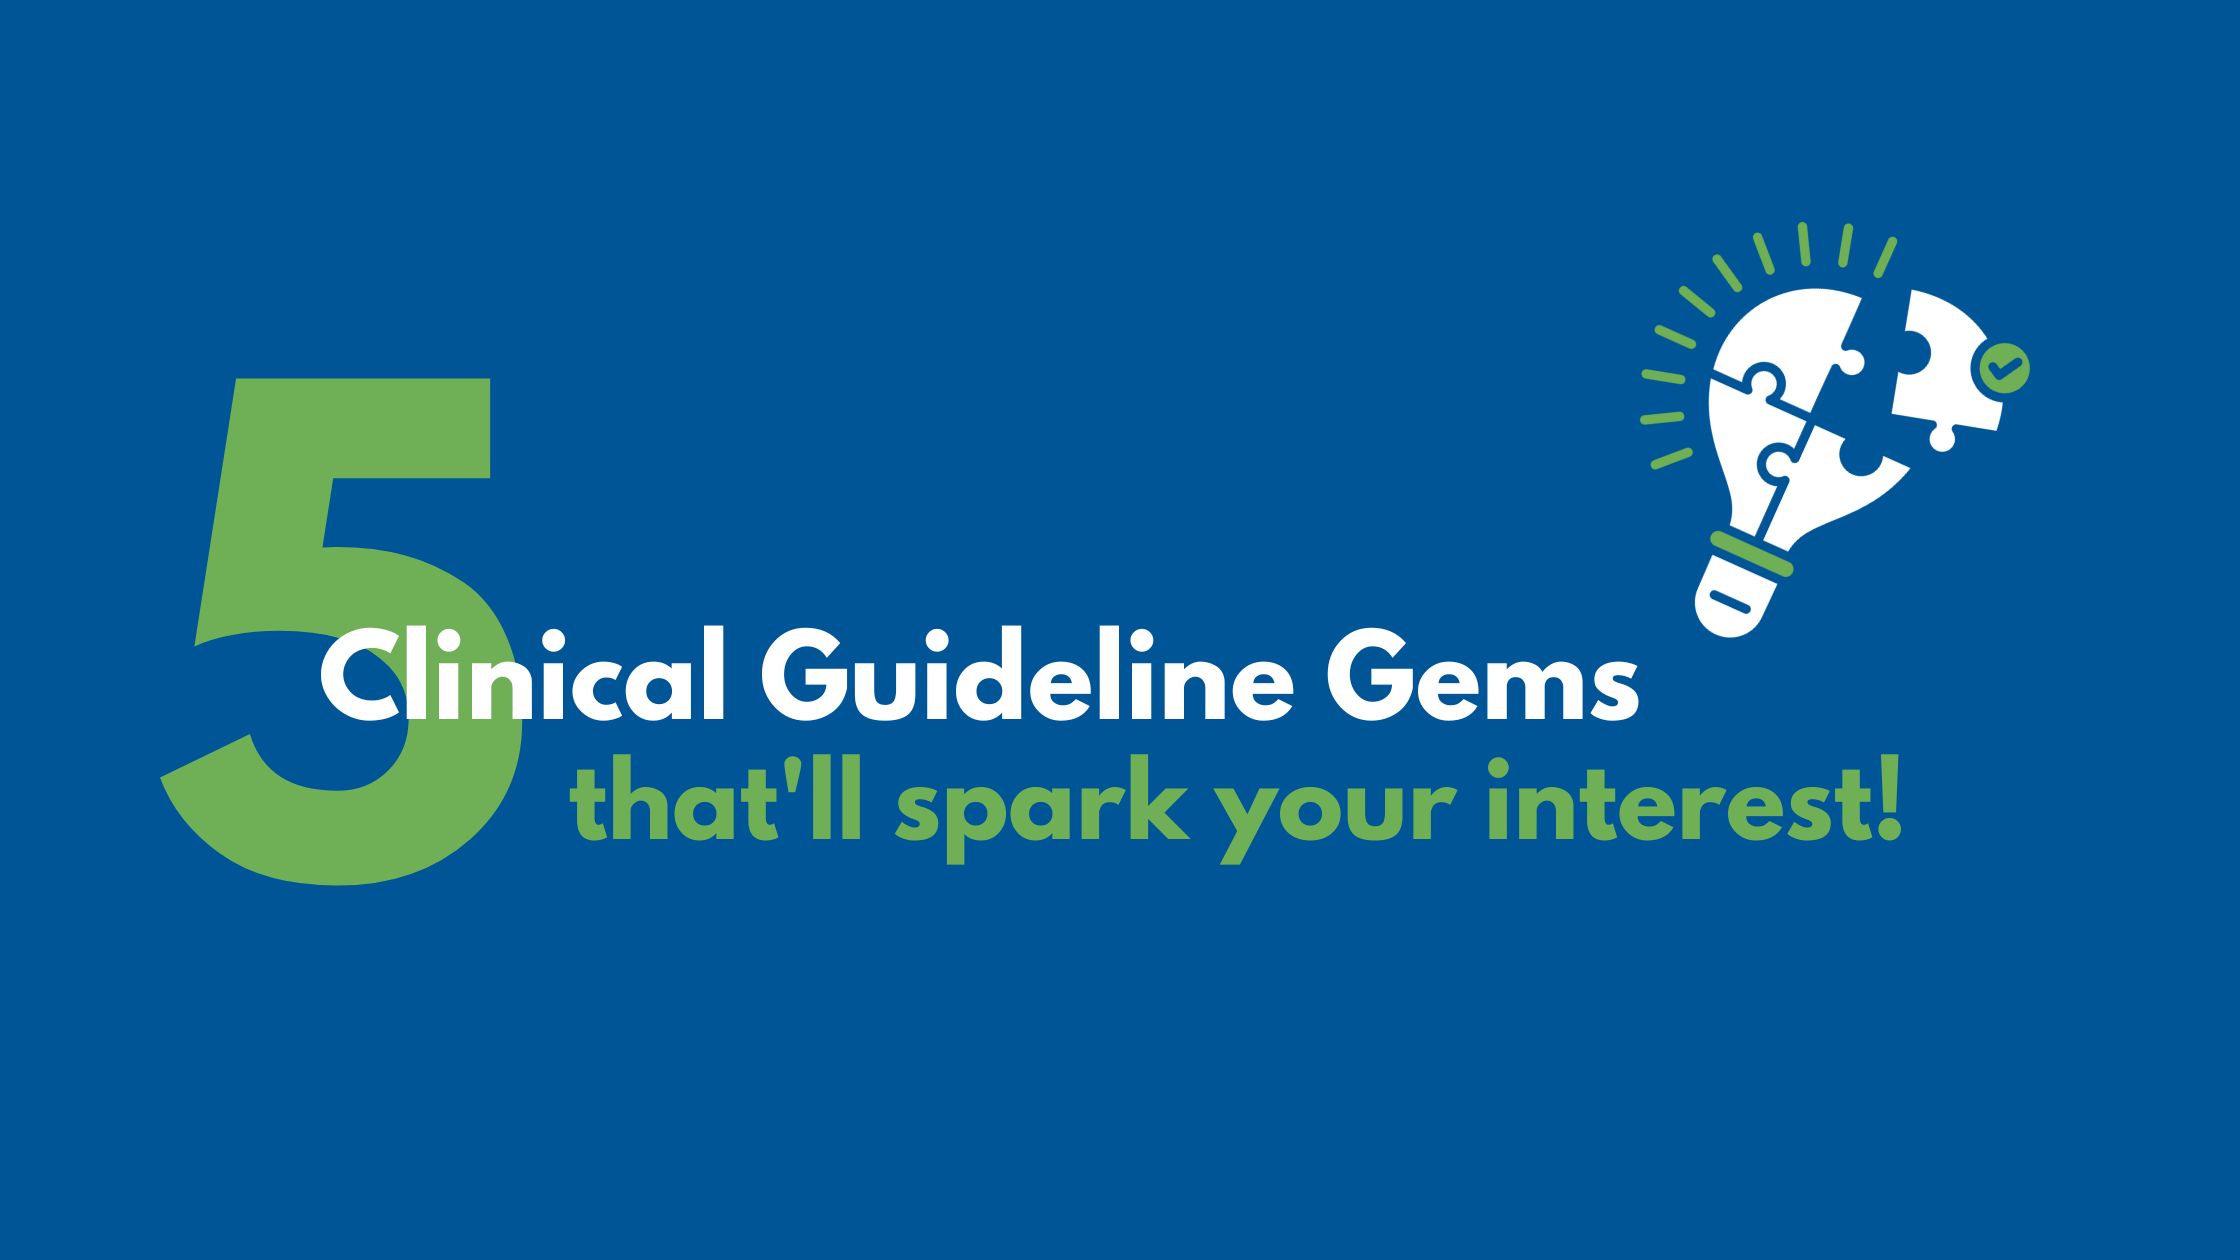 5 Clinical Guideline Gems: That'll Spark Your Interest Hero Image